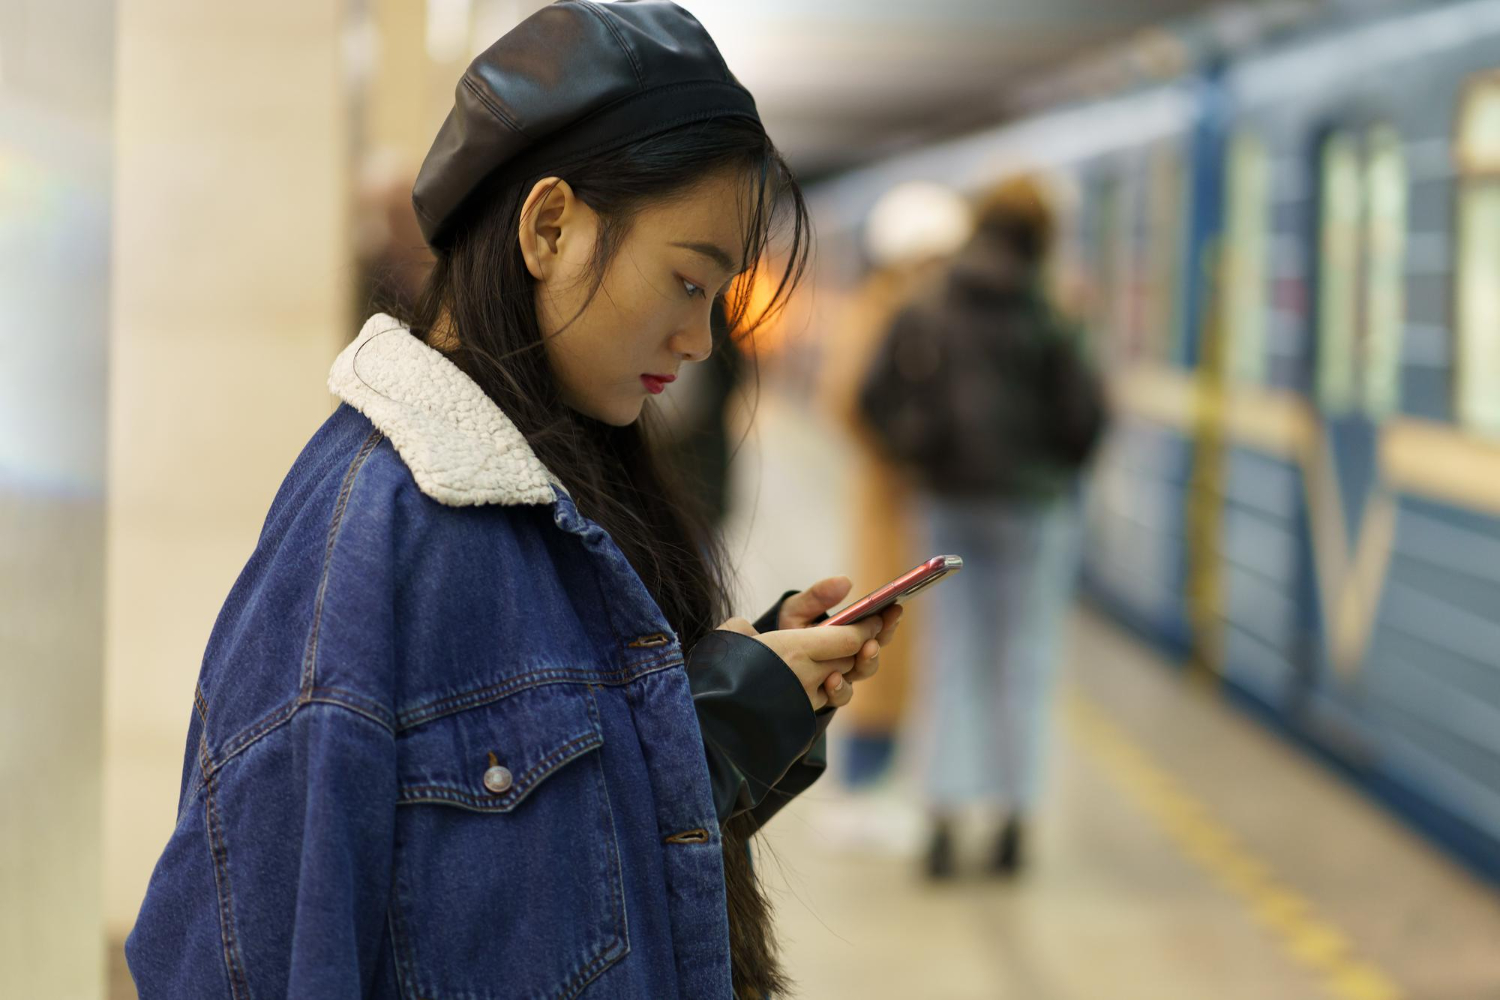 addicted from phone chinese girl pay no attention arriving train platform scroll social media